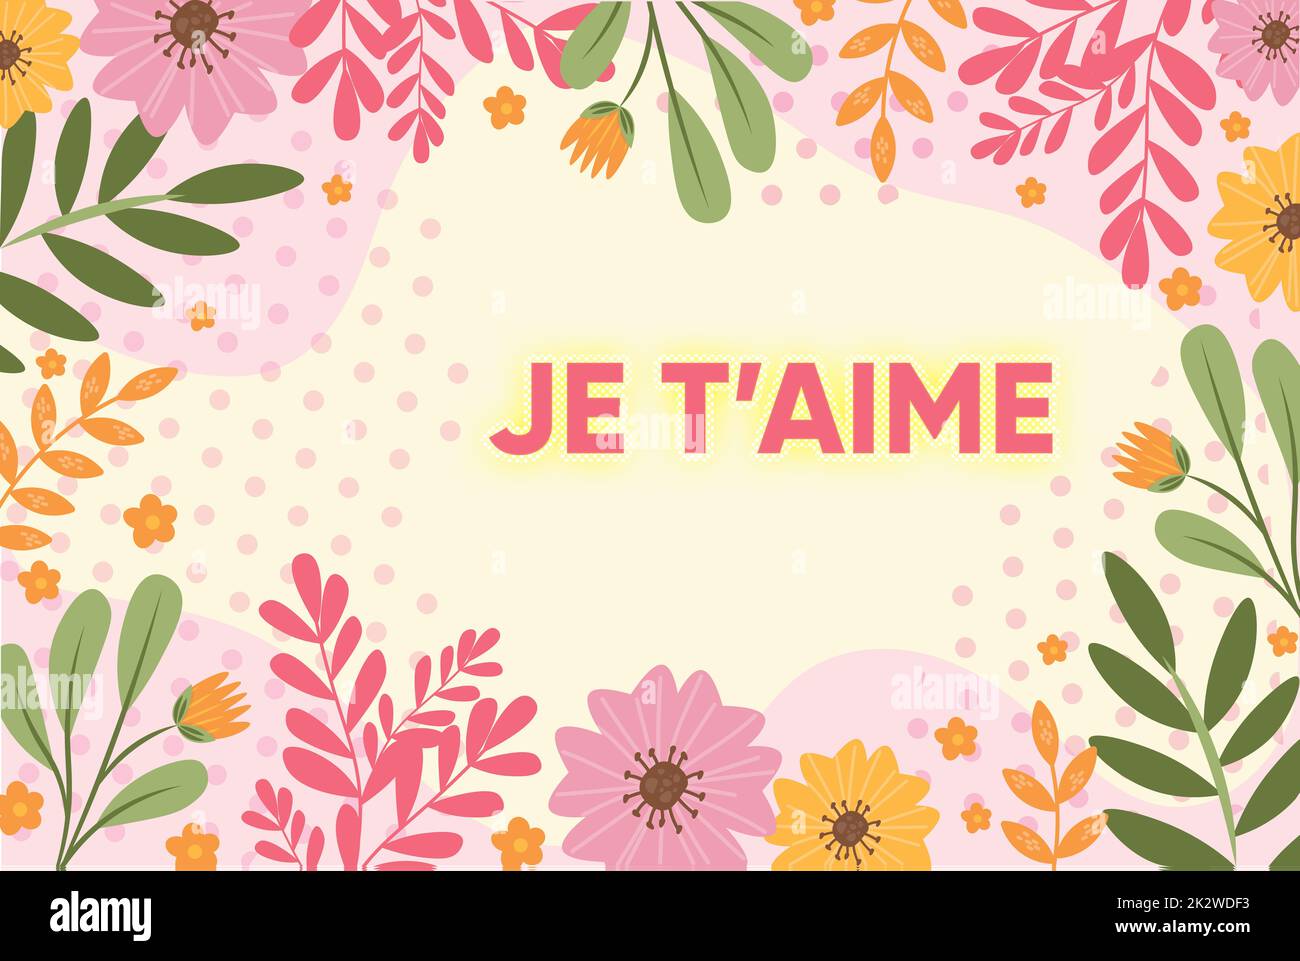 Writing displaying text JE TAIME. Internet Concept French word expressing love meaning I love you Frame Decorated With Colorful Flowers And Foliage Arranged Harmoniously. Stock Photo